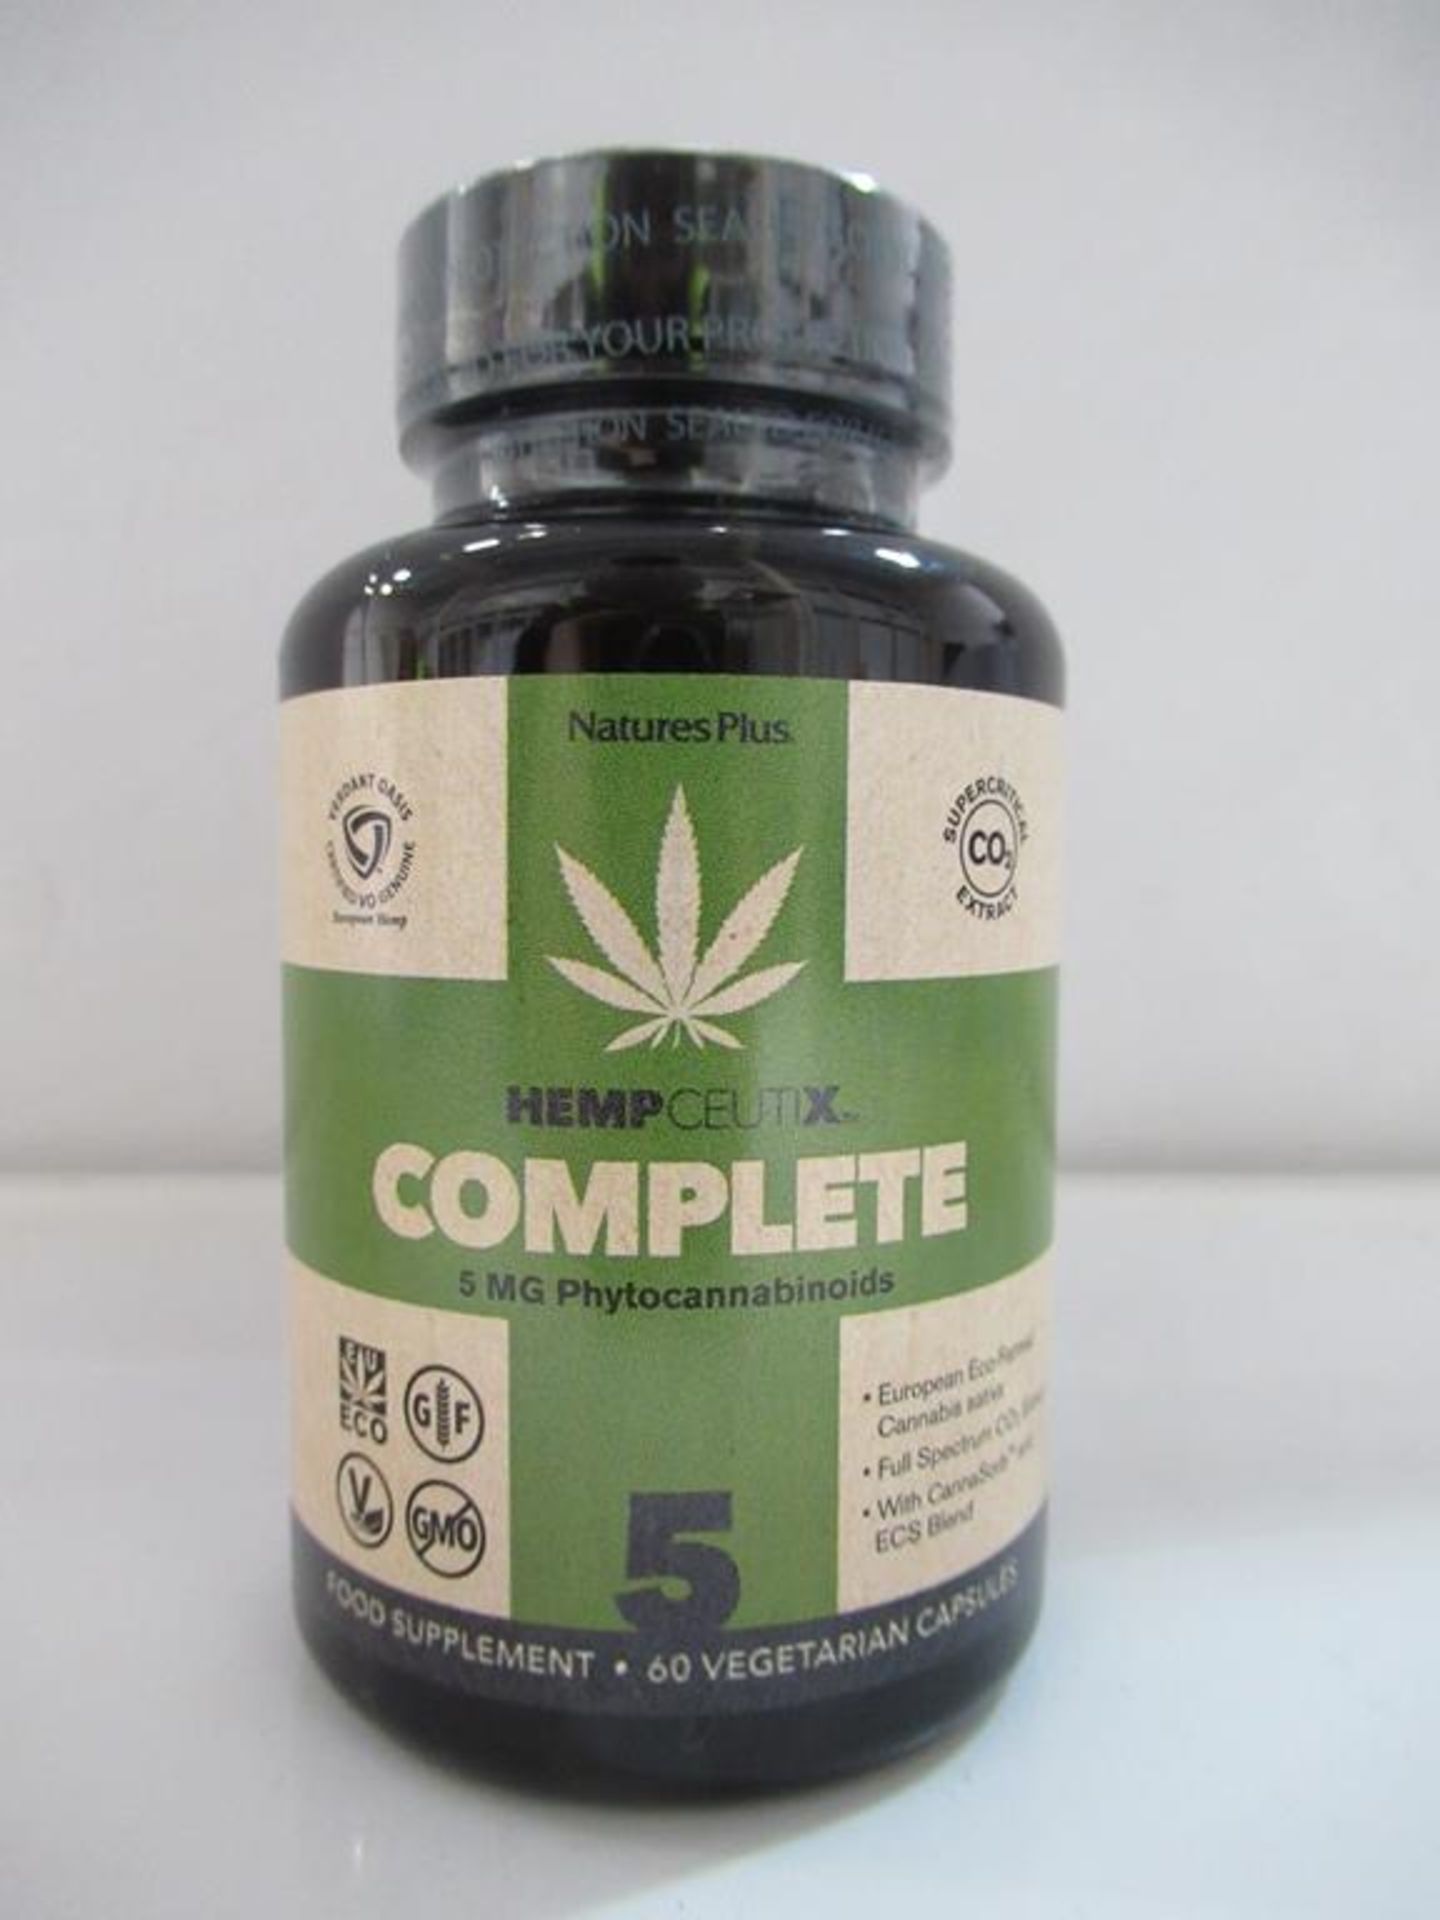 7 supplements to include Lifeplan Relax On, Botanicals Garcinia Cambogia complex, Natures Plus Niaci - Image 3 of 8